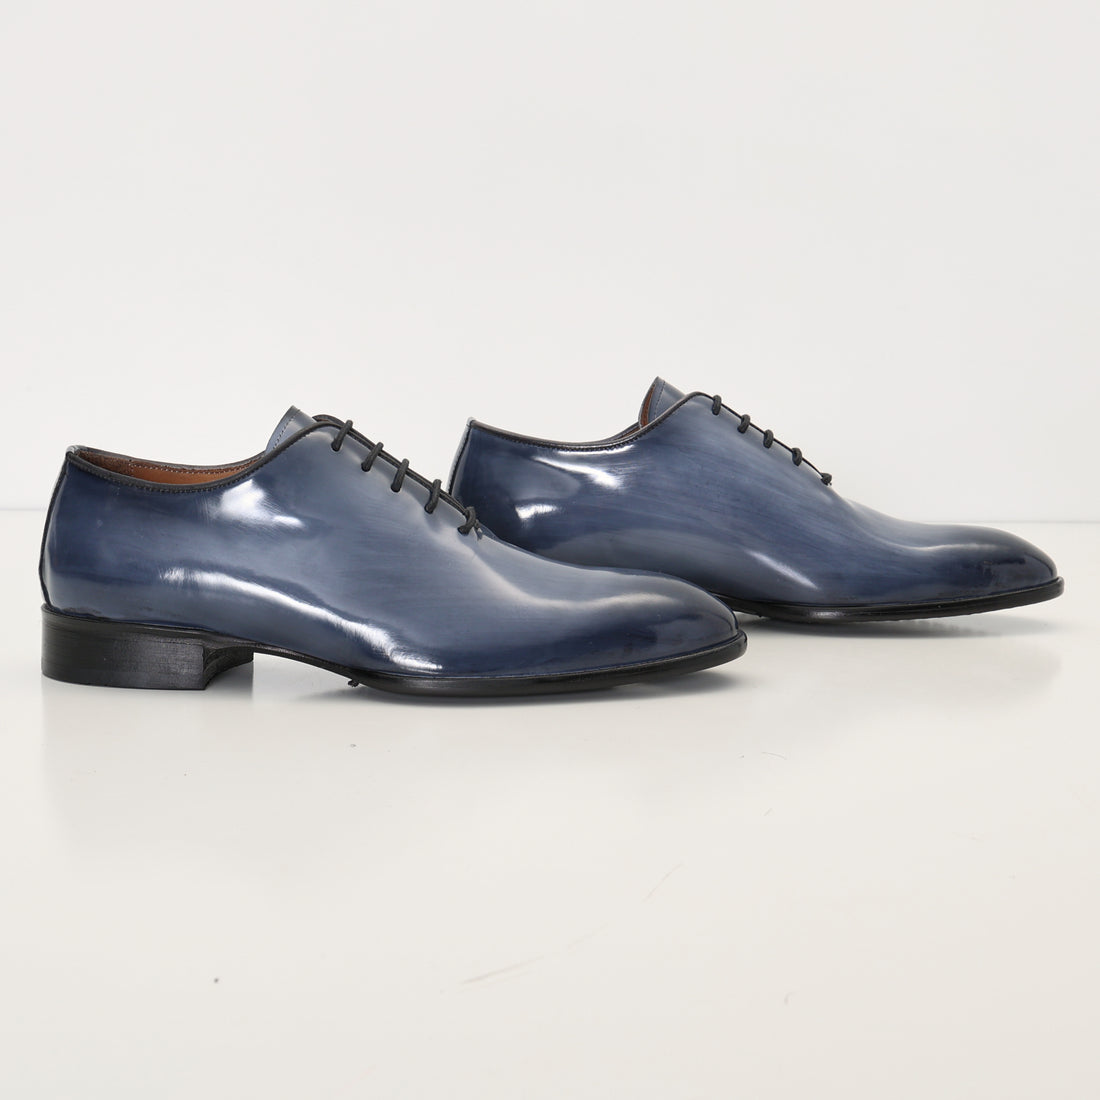 N° AC04 hand paint patina PATENT LEATHER OXFORDS - GREY